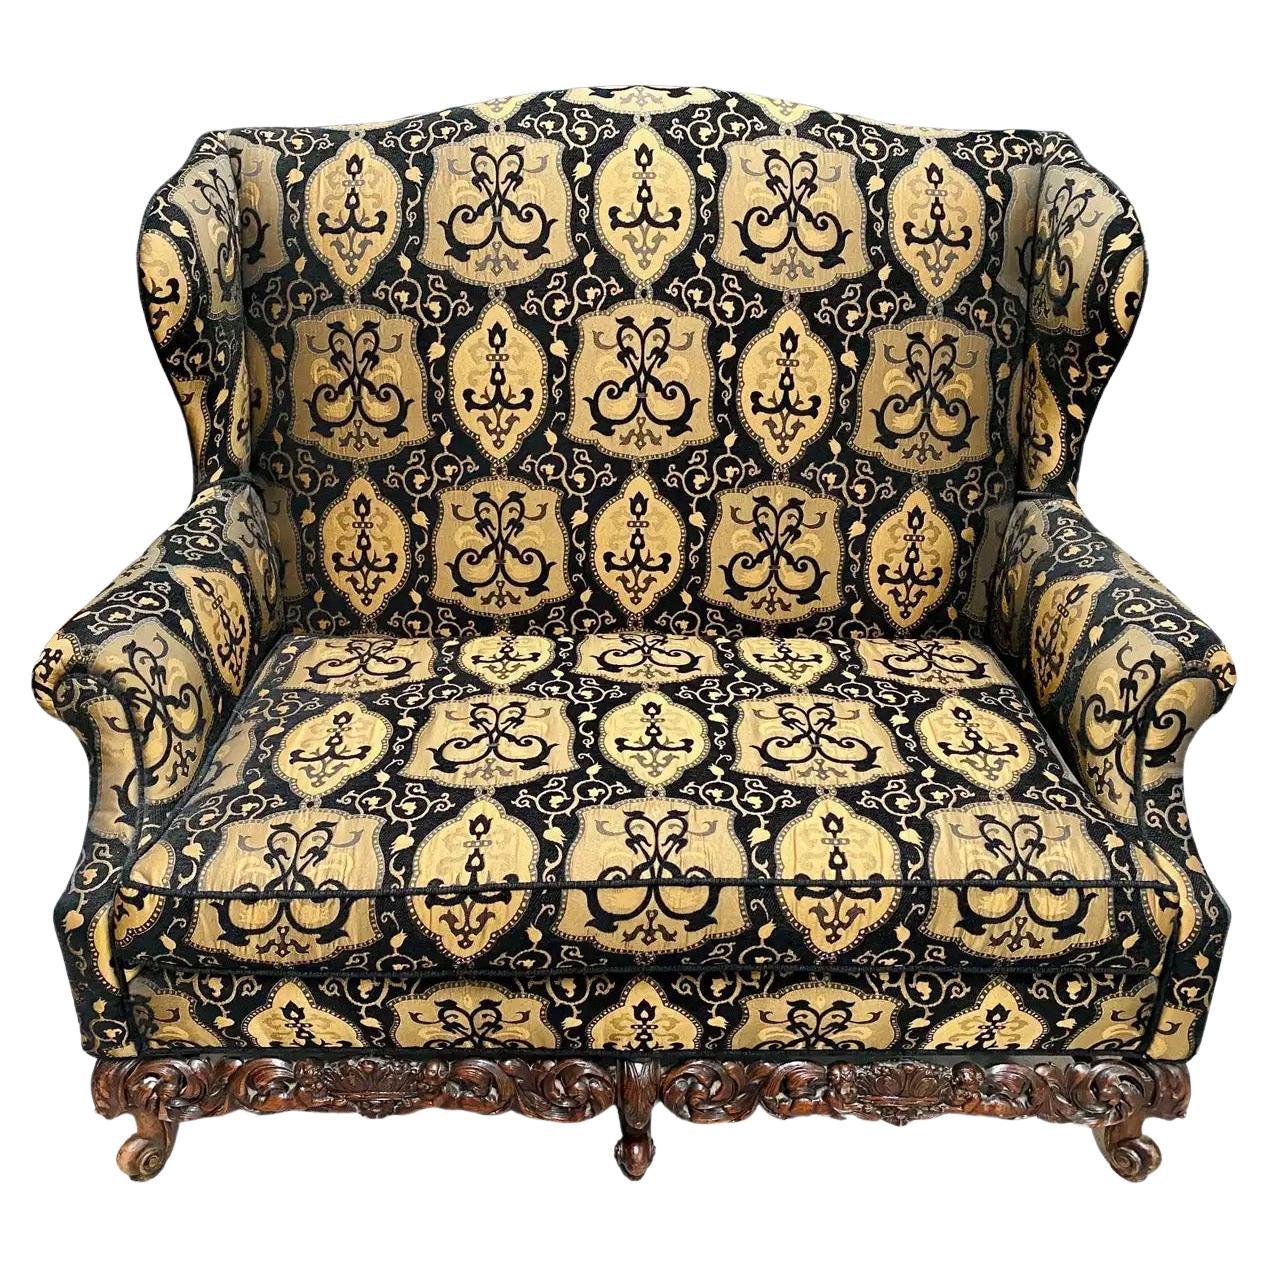 Italian Rococo Revival Style Settee or Sofa with Heraldic Motif in Black & Beige For Sale